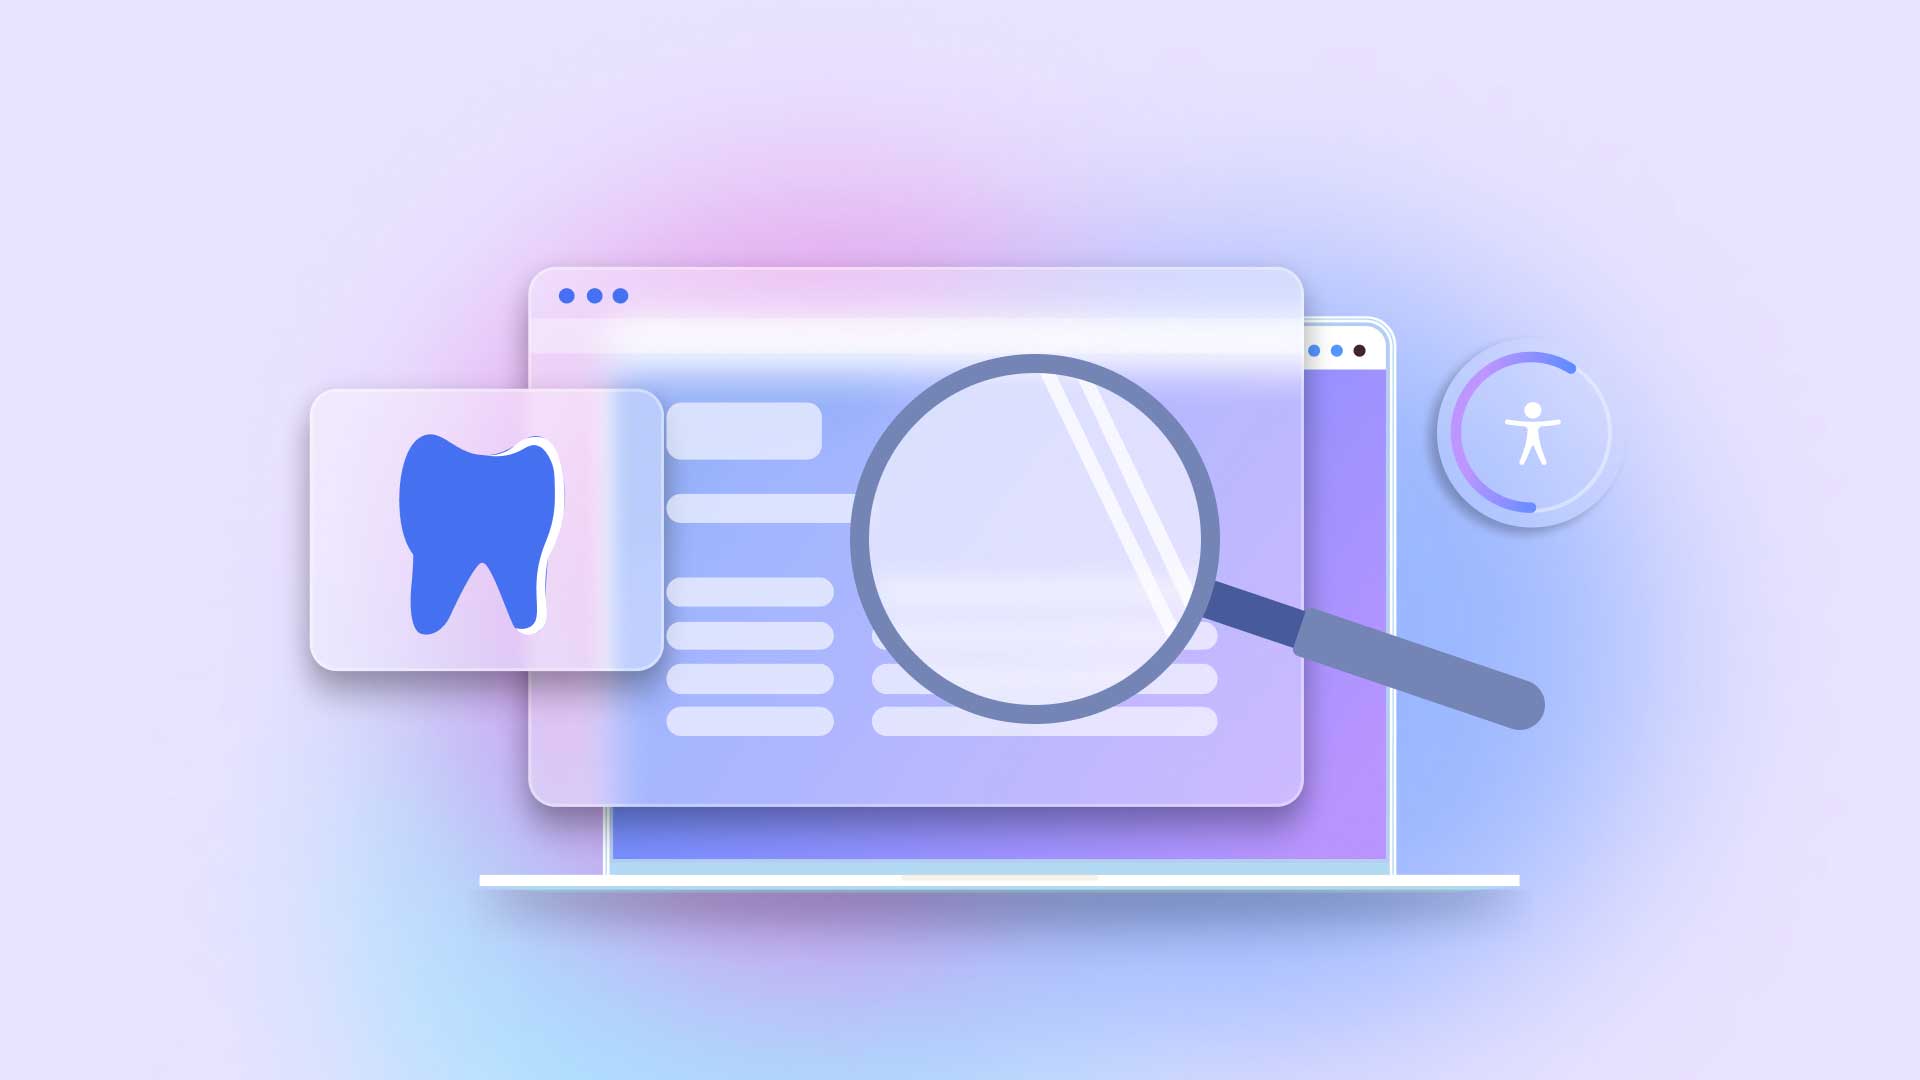 Bite-sized accessibility: open wide for accessible dental websites